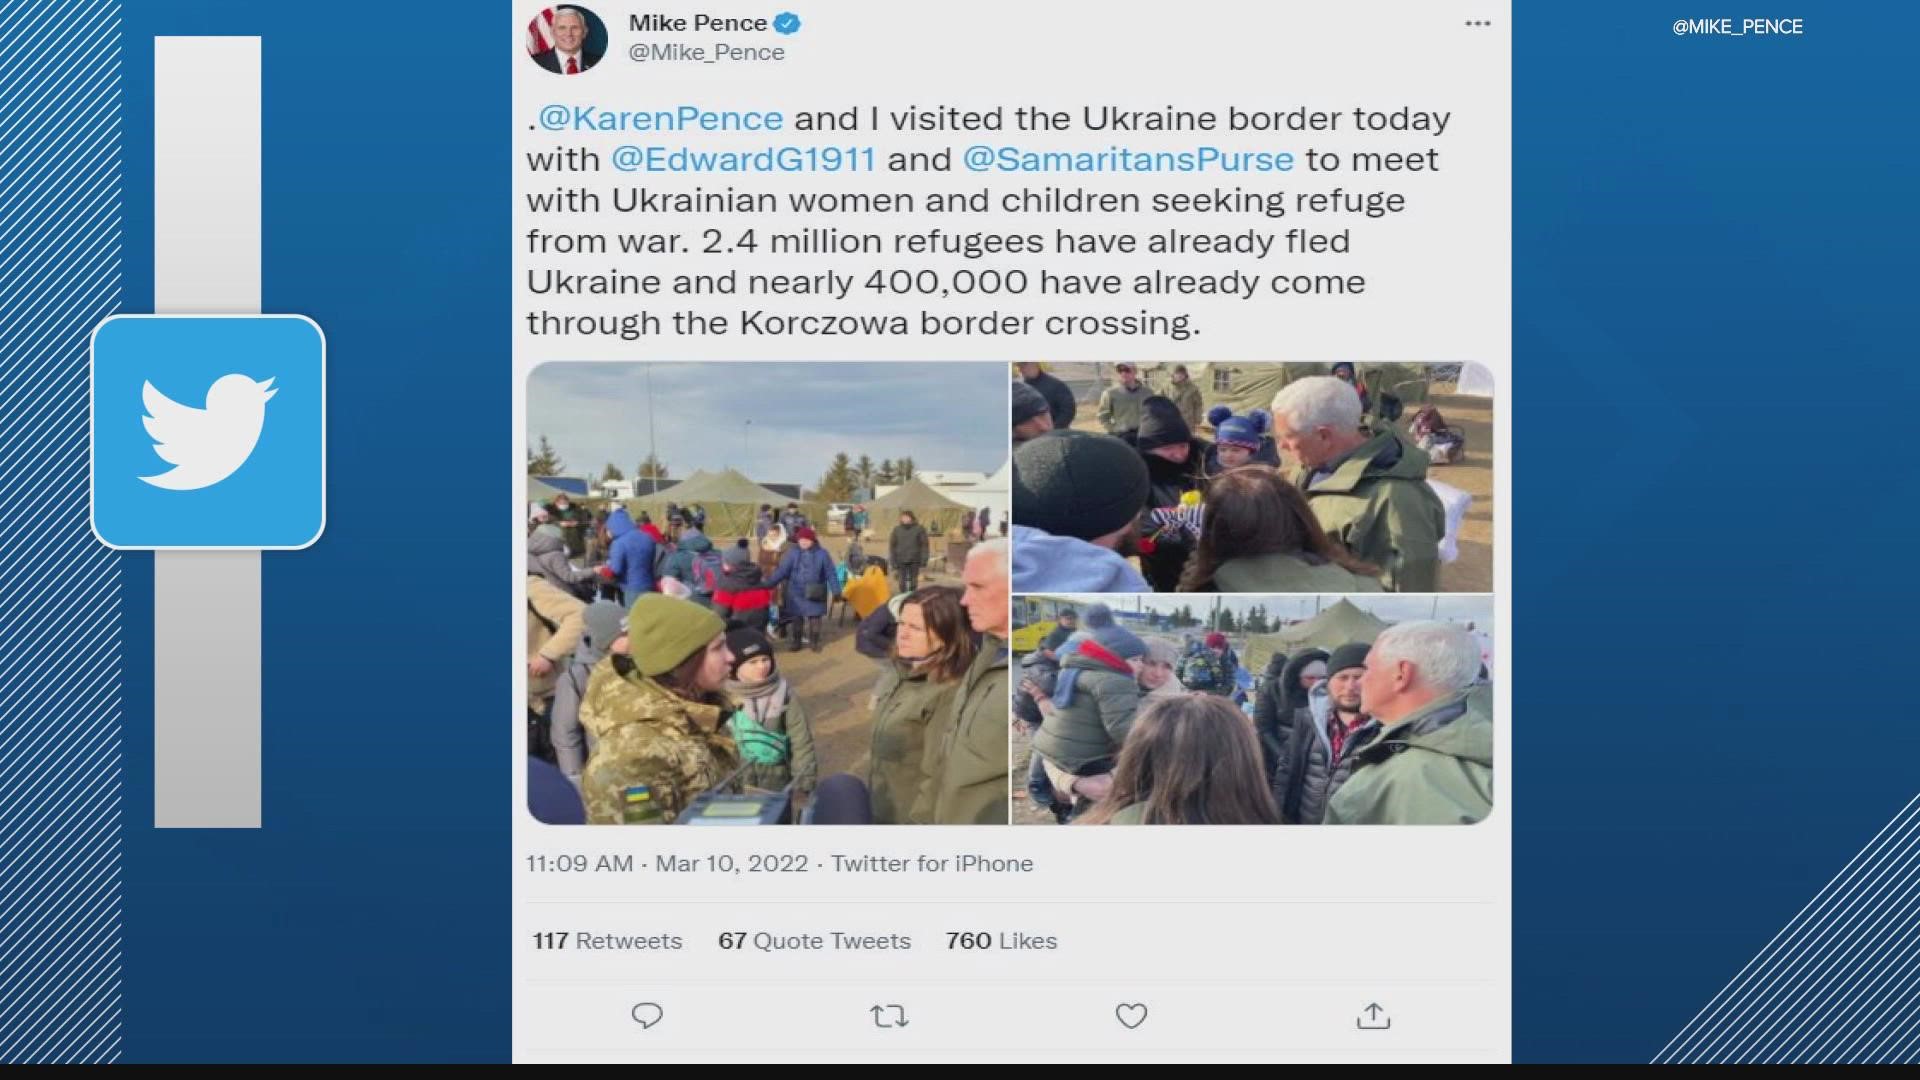 Former Vice President Mike Pence and his wife Karen visited the Ukraine border.